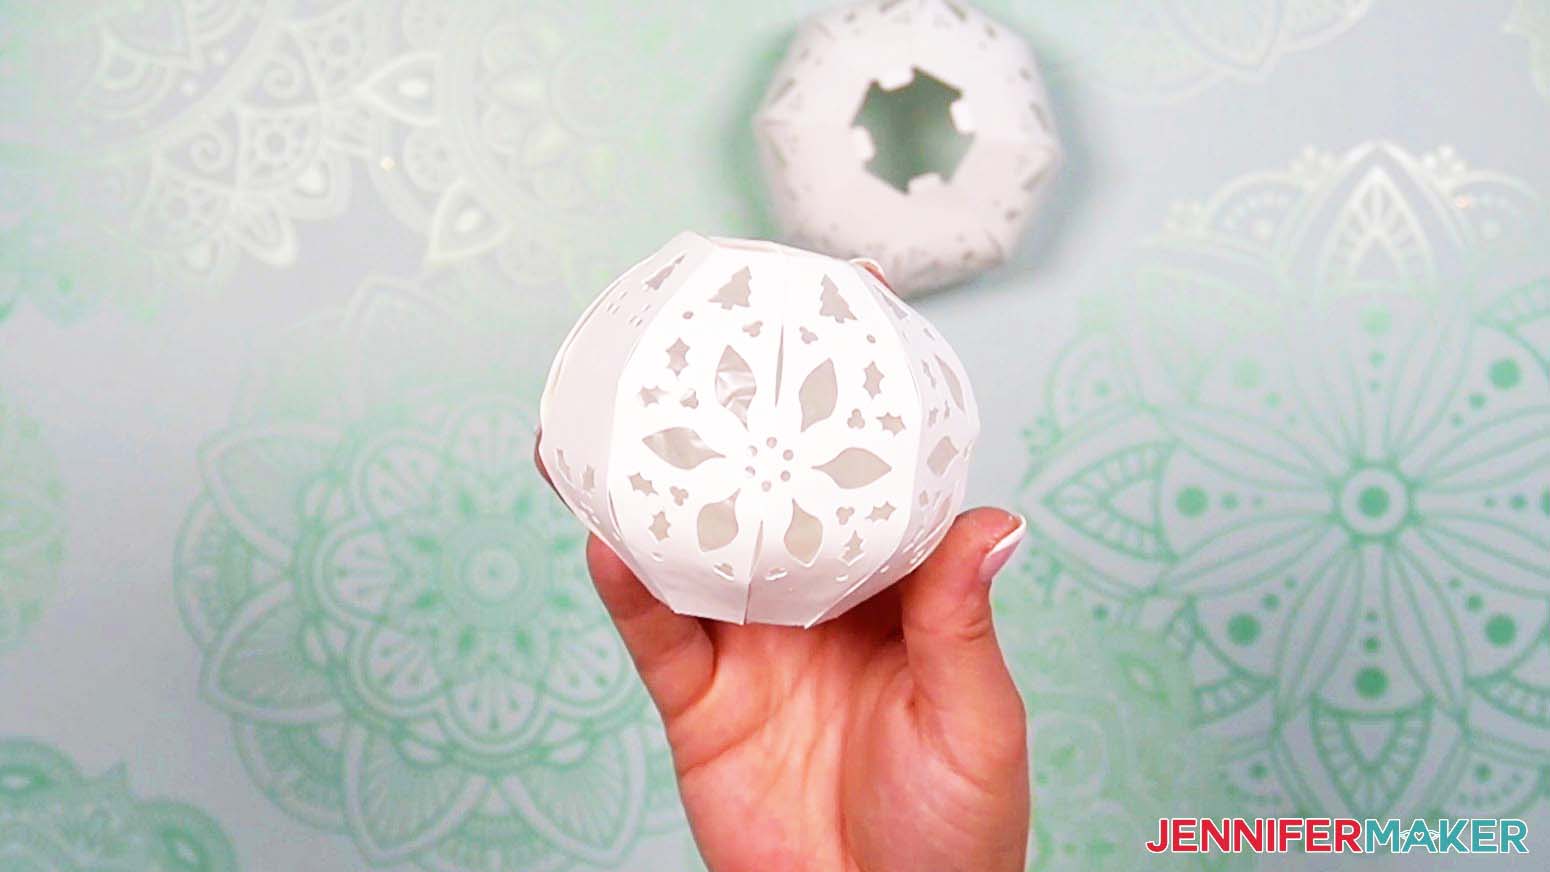 Once all the tabs are attached, the light up snowman's head pieces will form a sphere shape